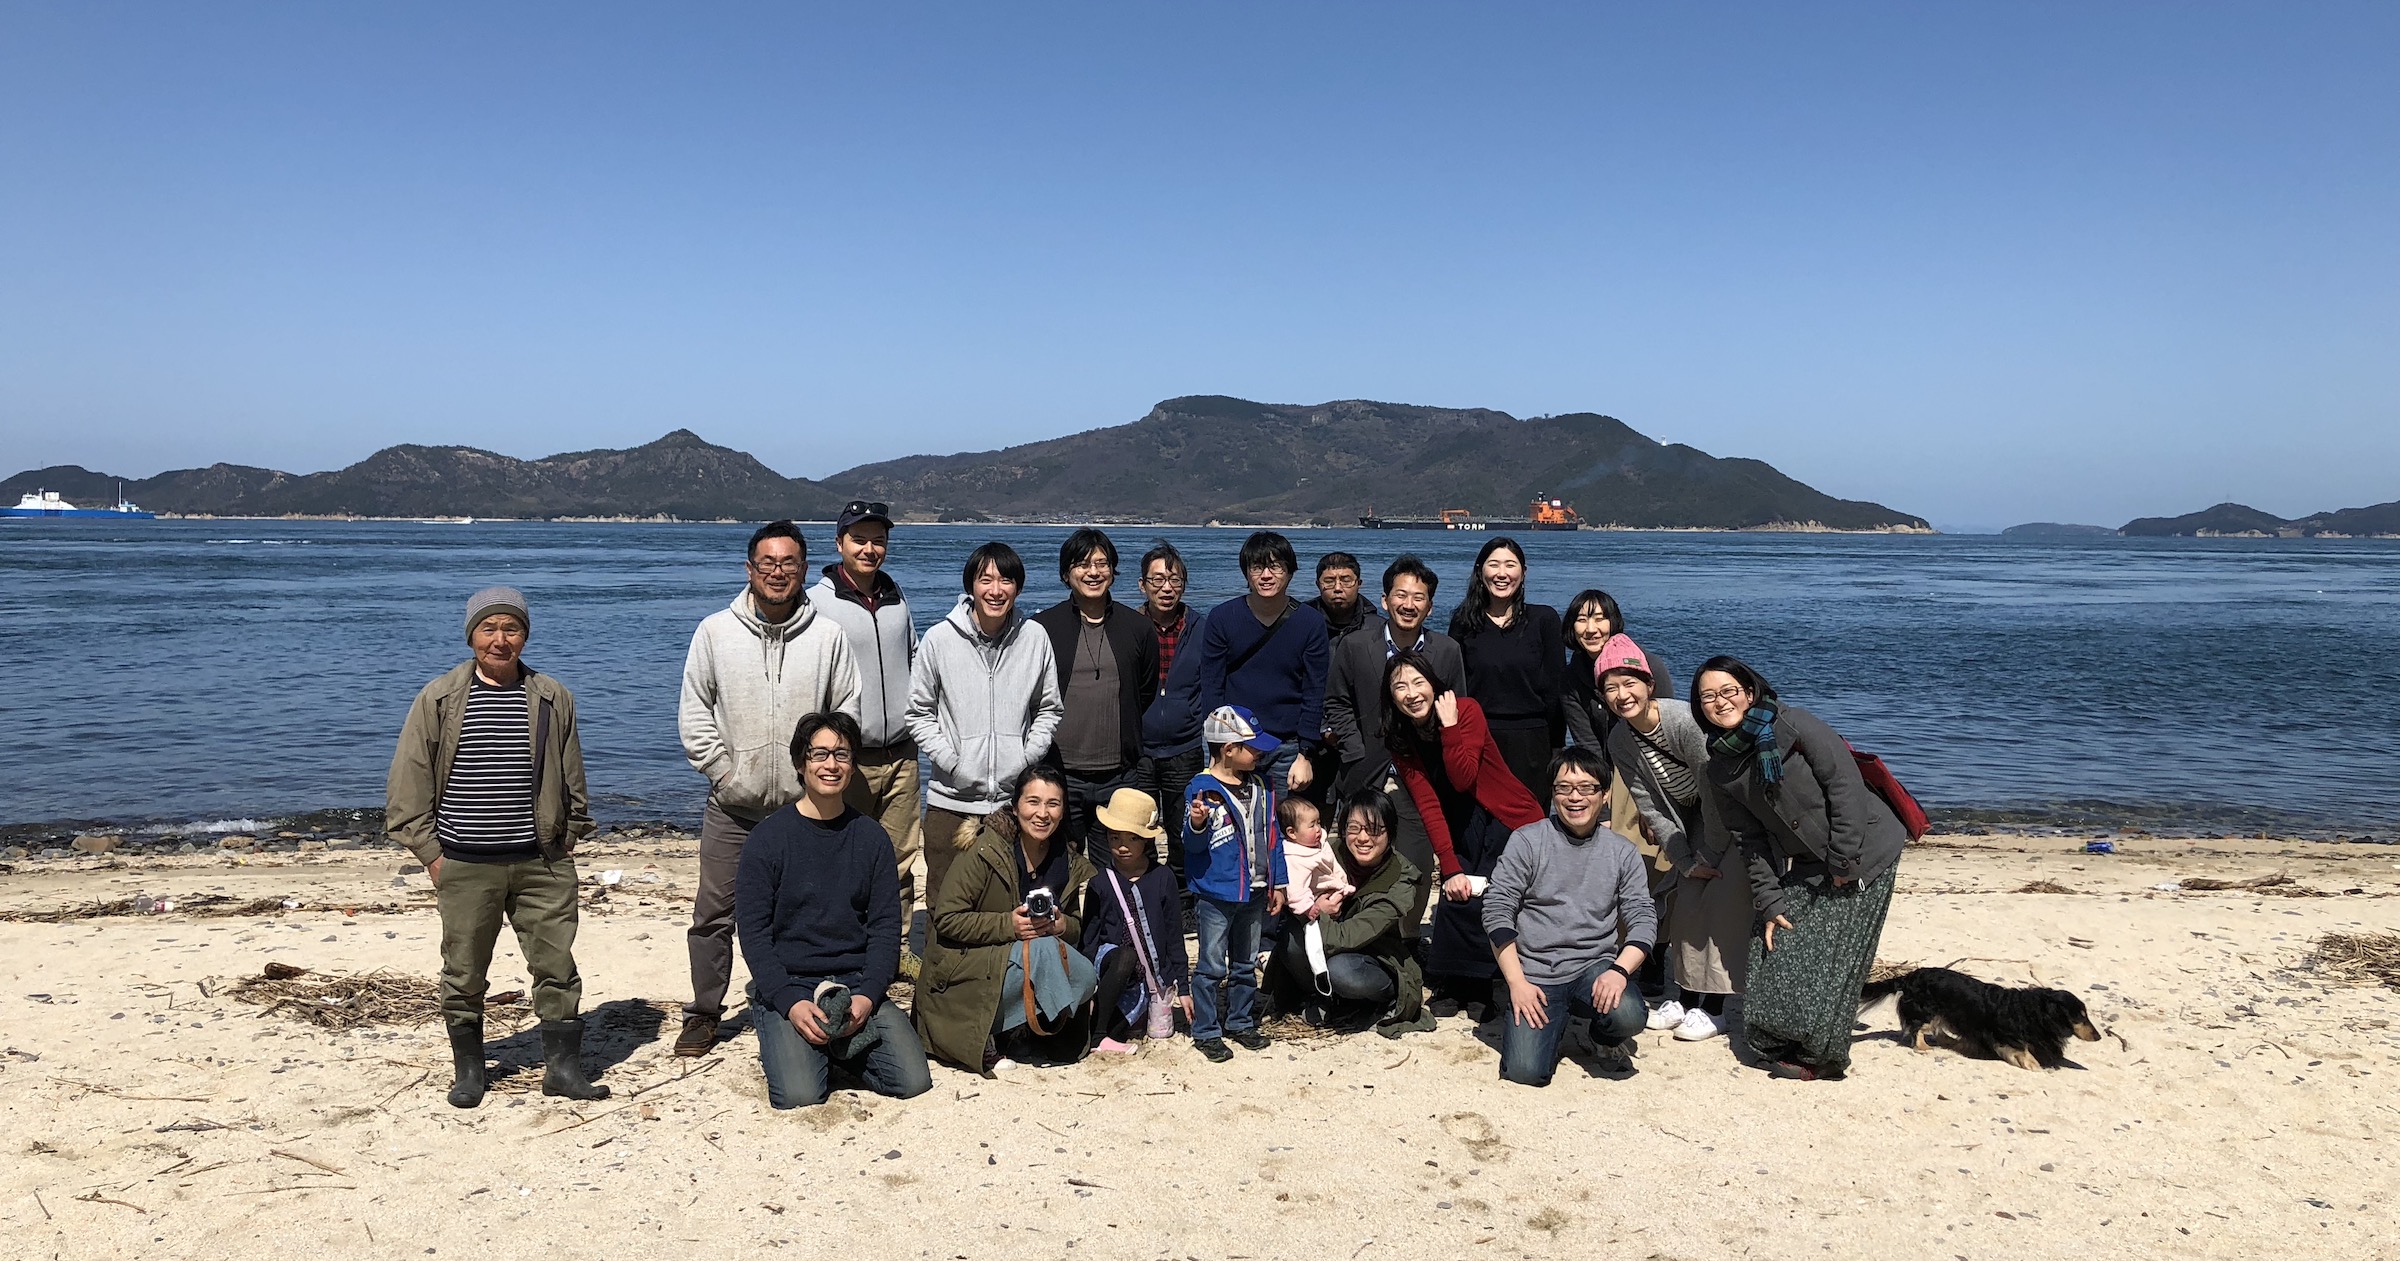 How WordPress is Powering a New Community on the Remote Island of Ogijima